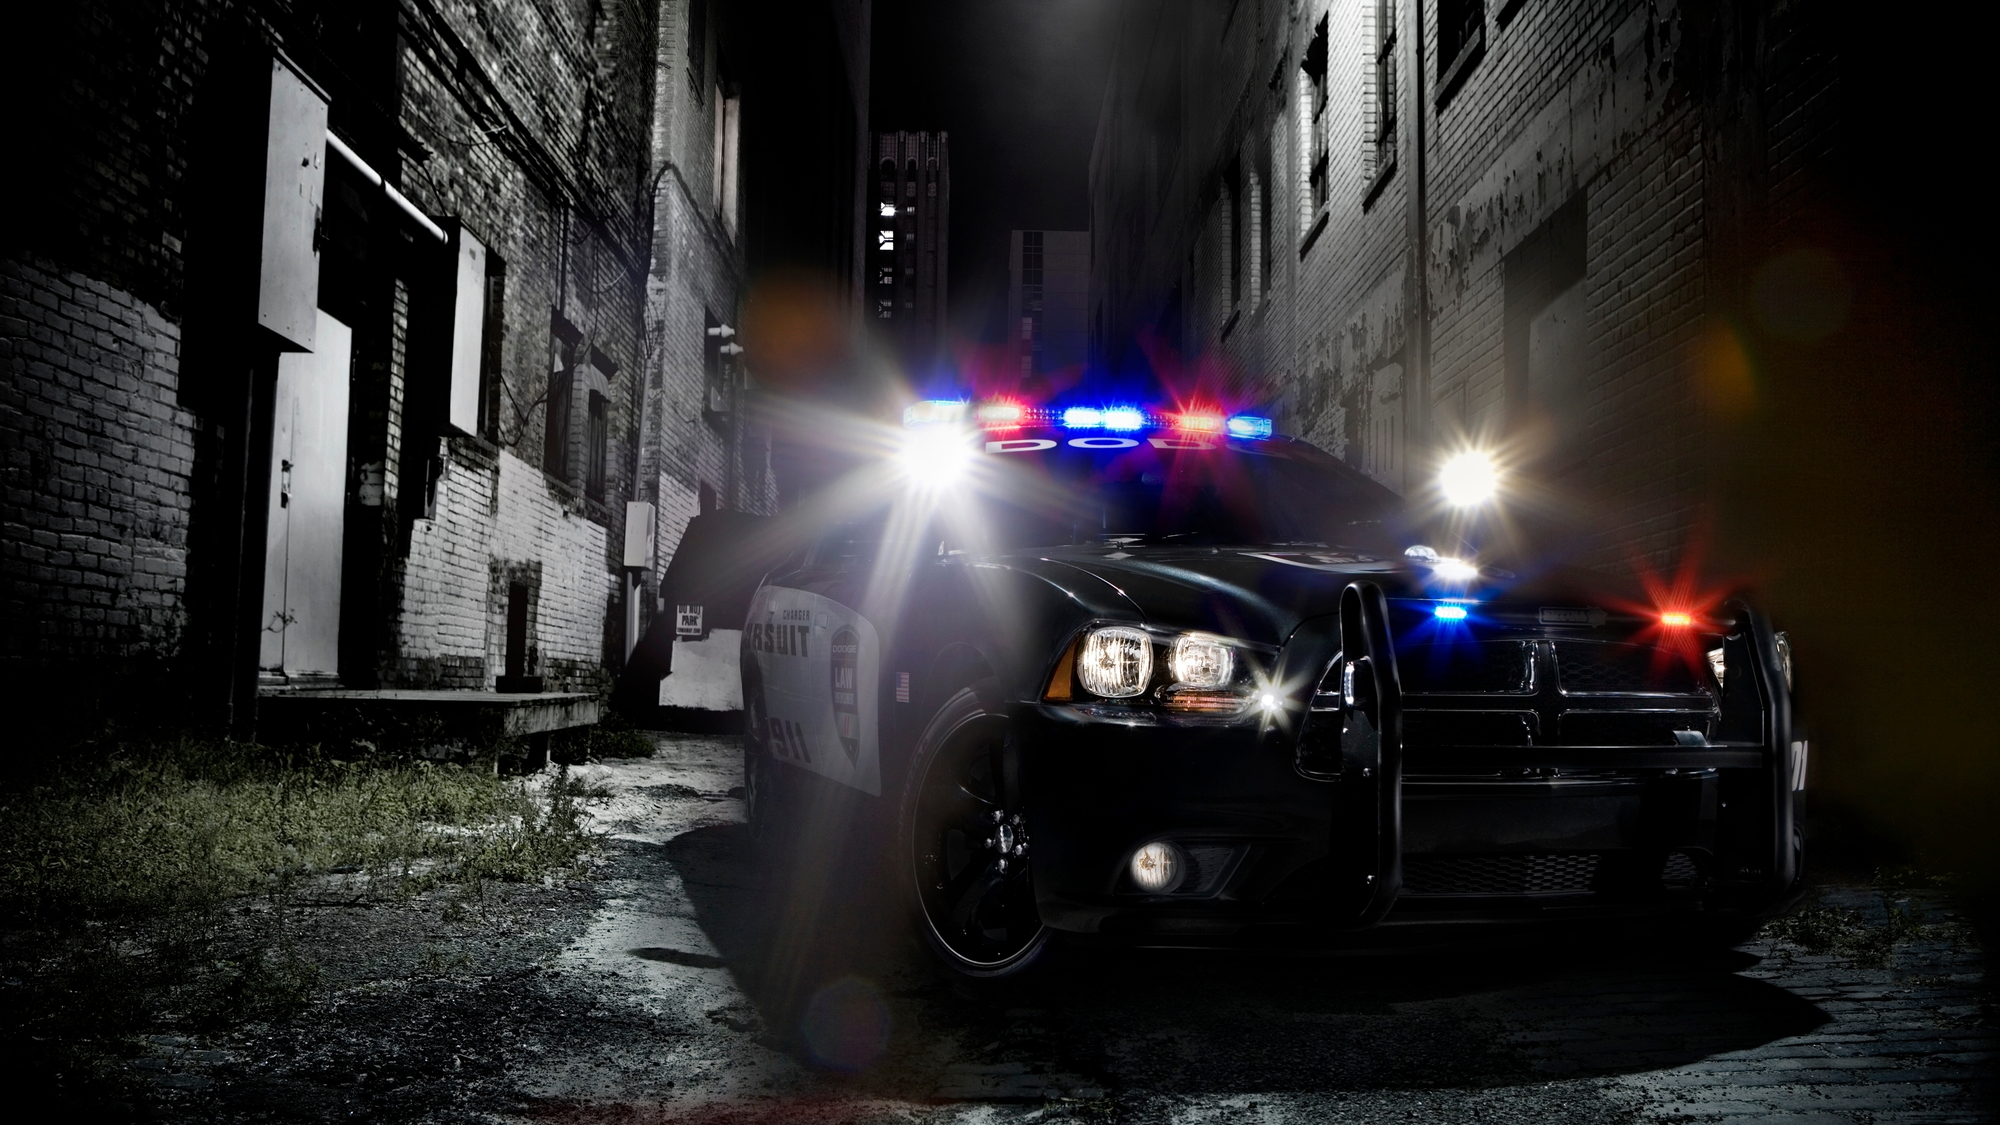 2011 Dodge Charger Pursuit police vehicle